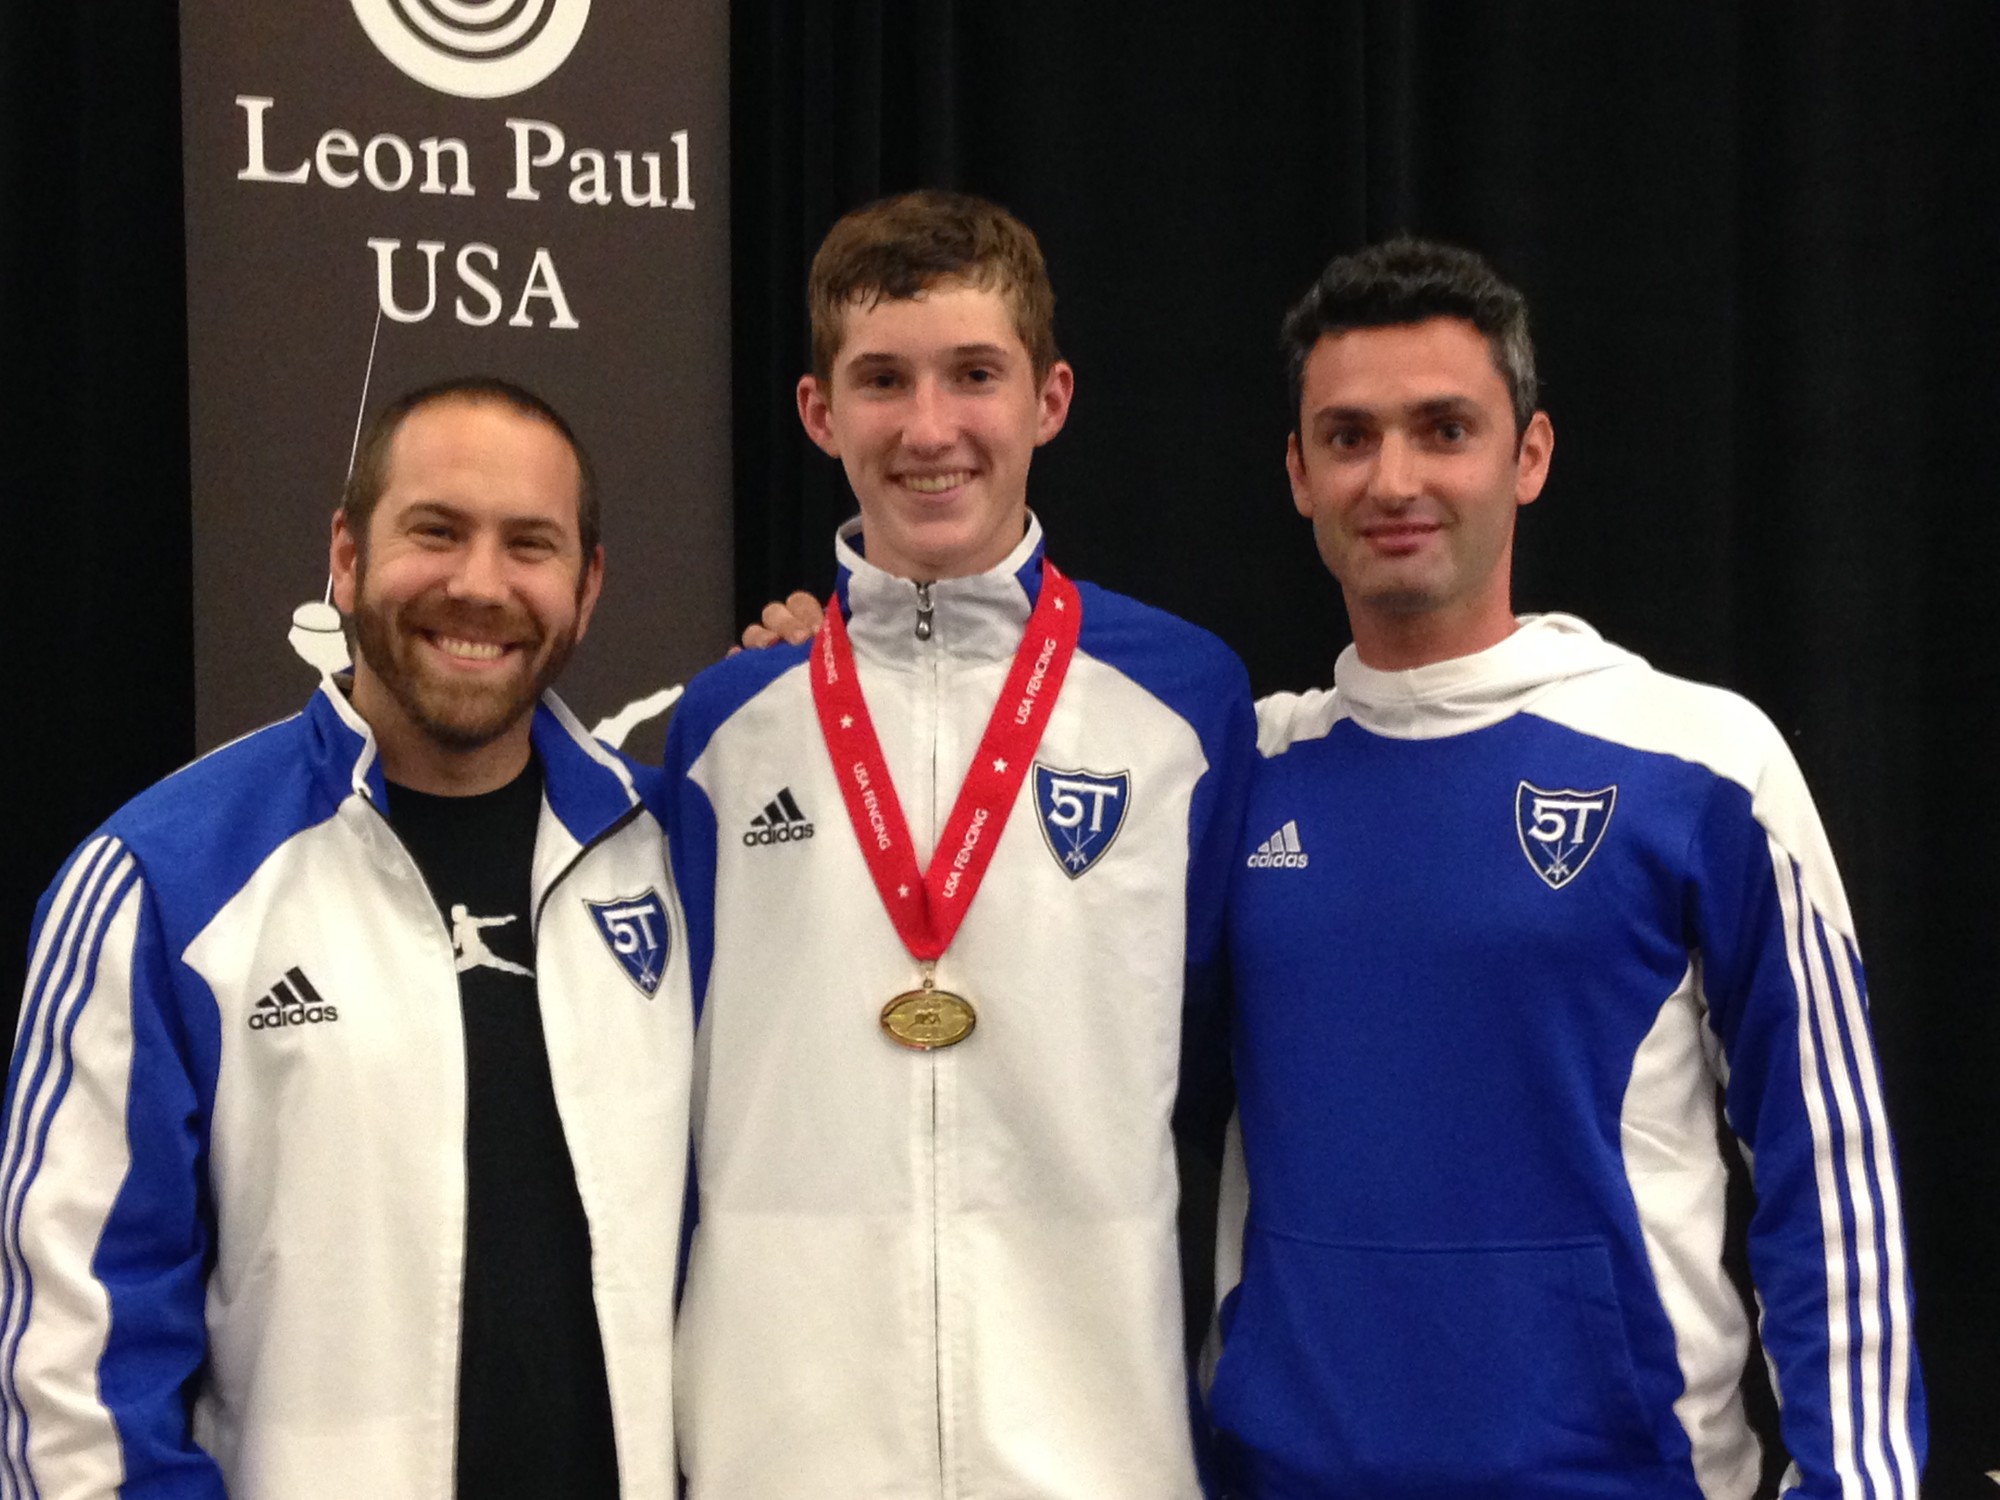 Andrew Machovec, center, with coaches Jonathan Tiomkin, left, and Gidon Retzkin after his gold-medal win at fencing’s summer nationals in San Jose, Calif., in June. Retzkin, his personal coach, received a coaching medal for Andrew’s win.